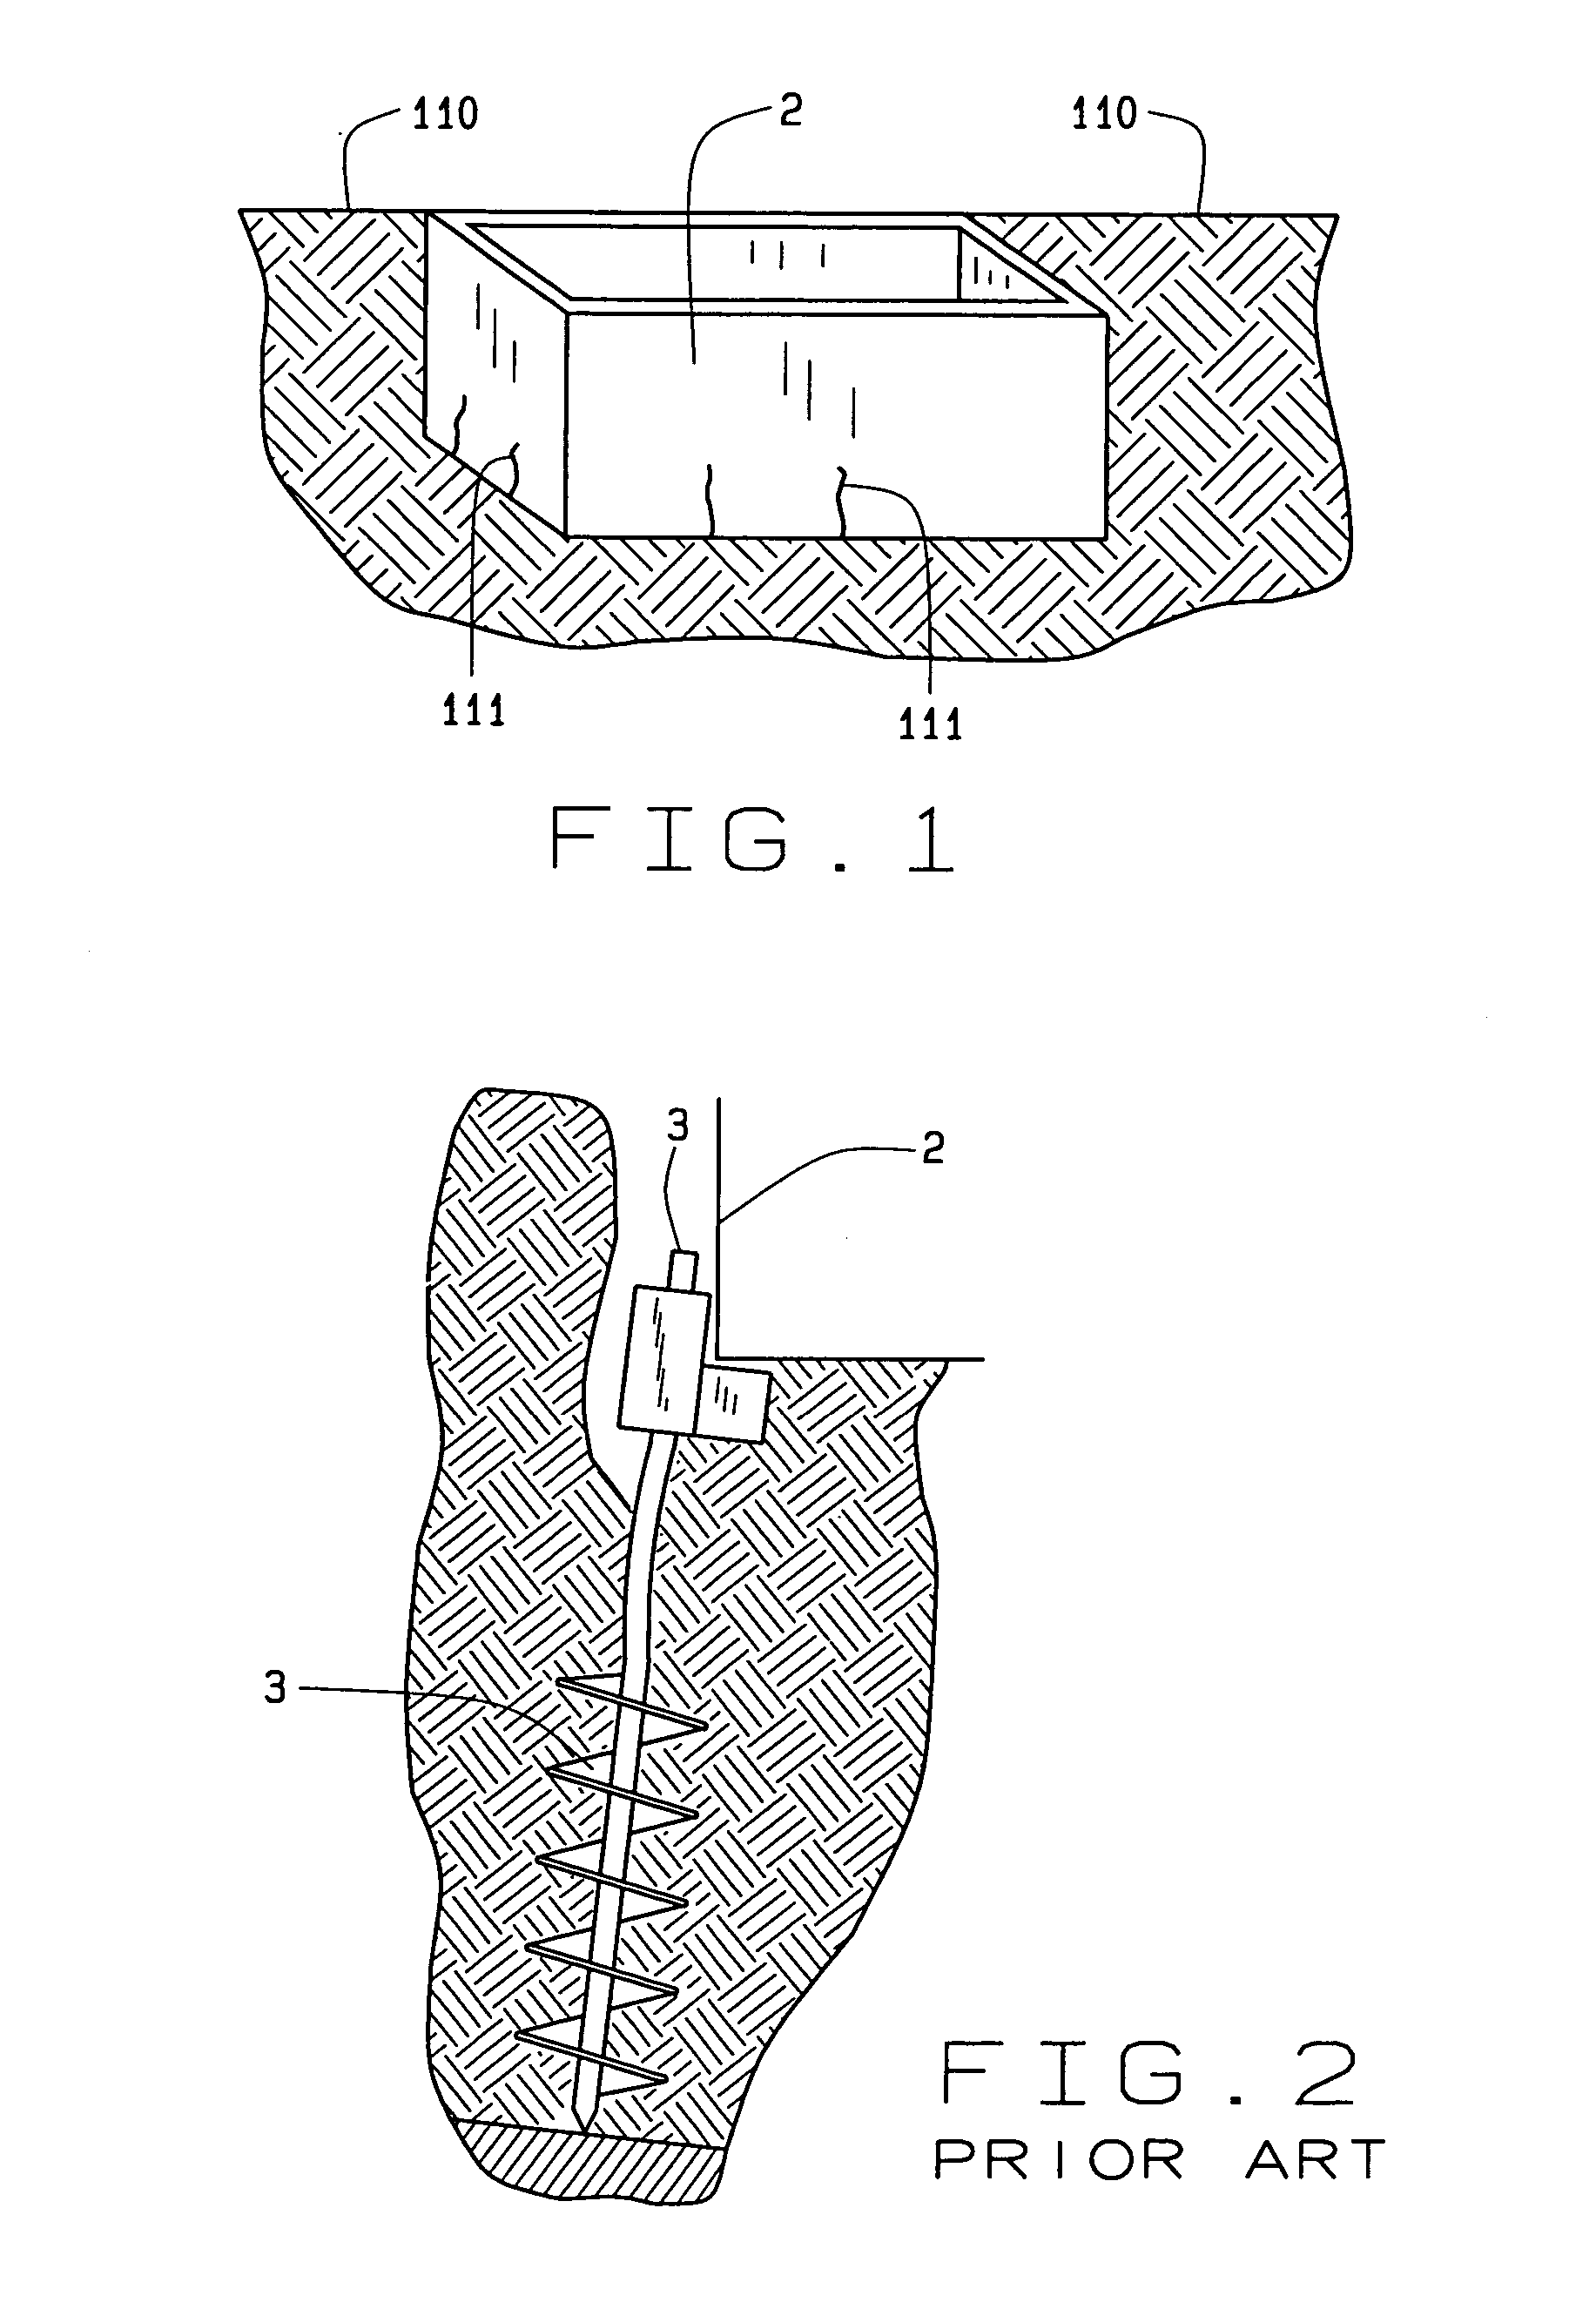 Bracket assembly for lifting and supporting a foundation